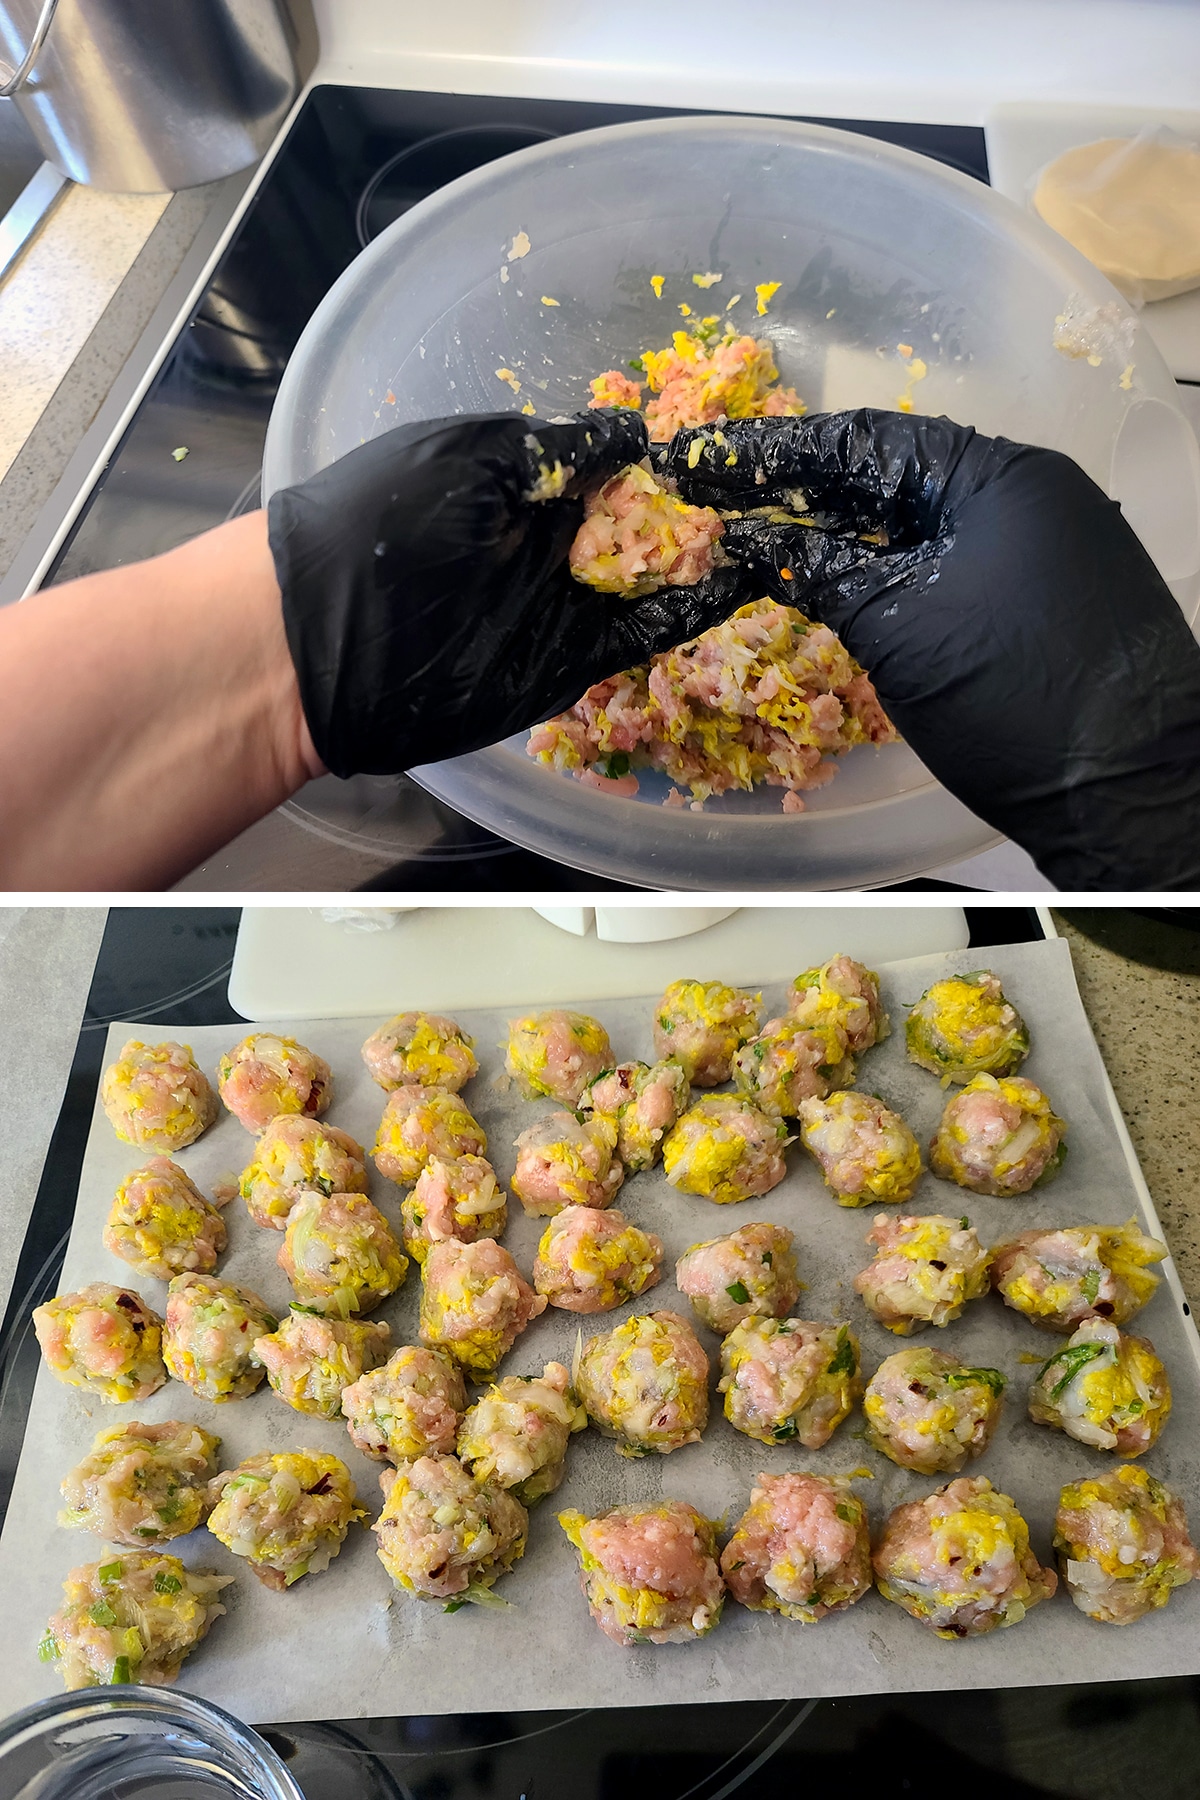 Hands form the filling into balls, and dozens of filling balls are arranged on parchment paper.